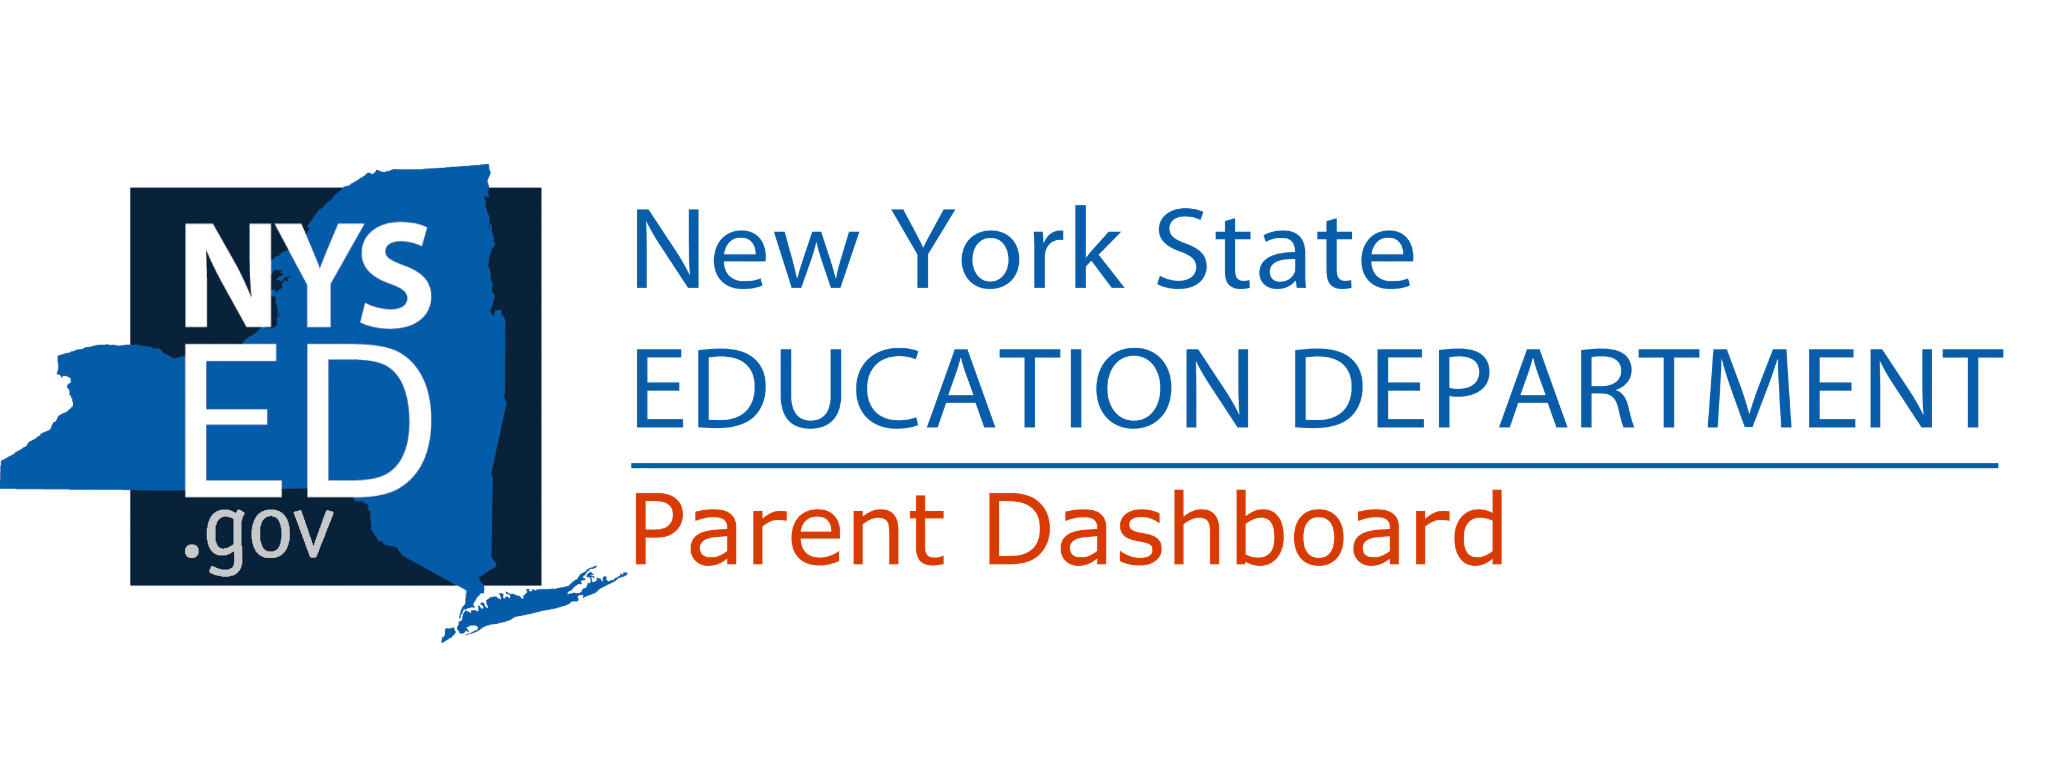 NYSED PARENT DASHBOARD